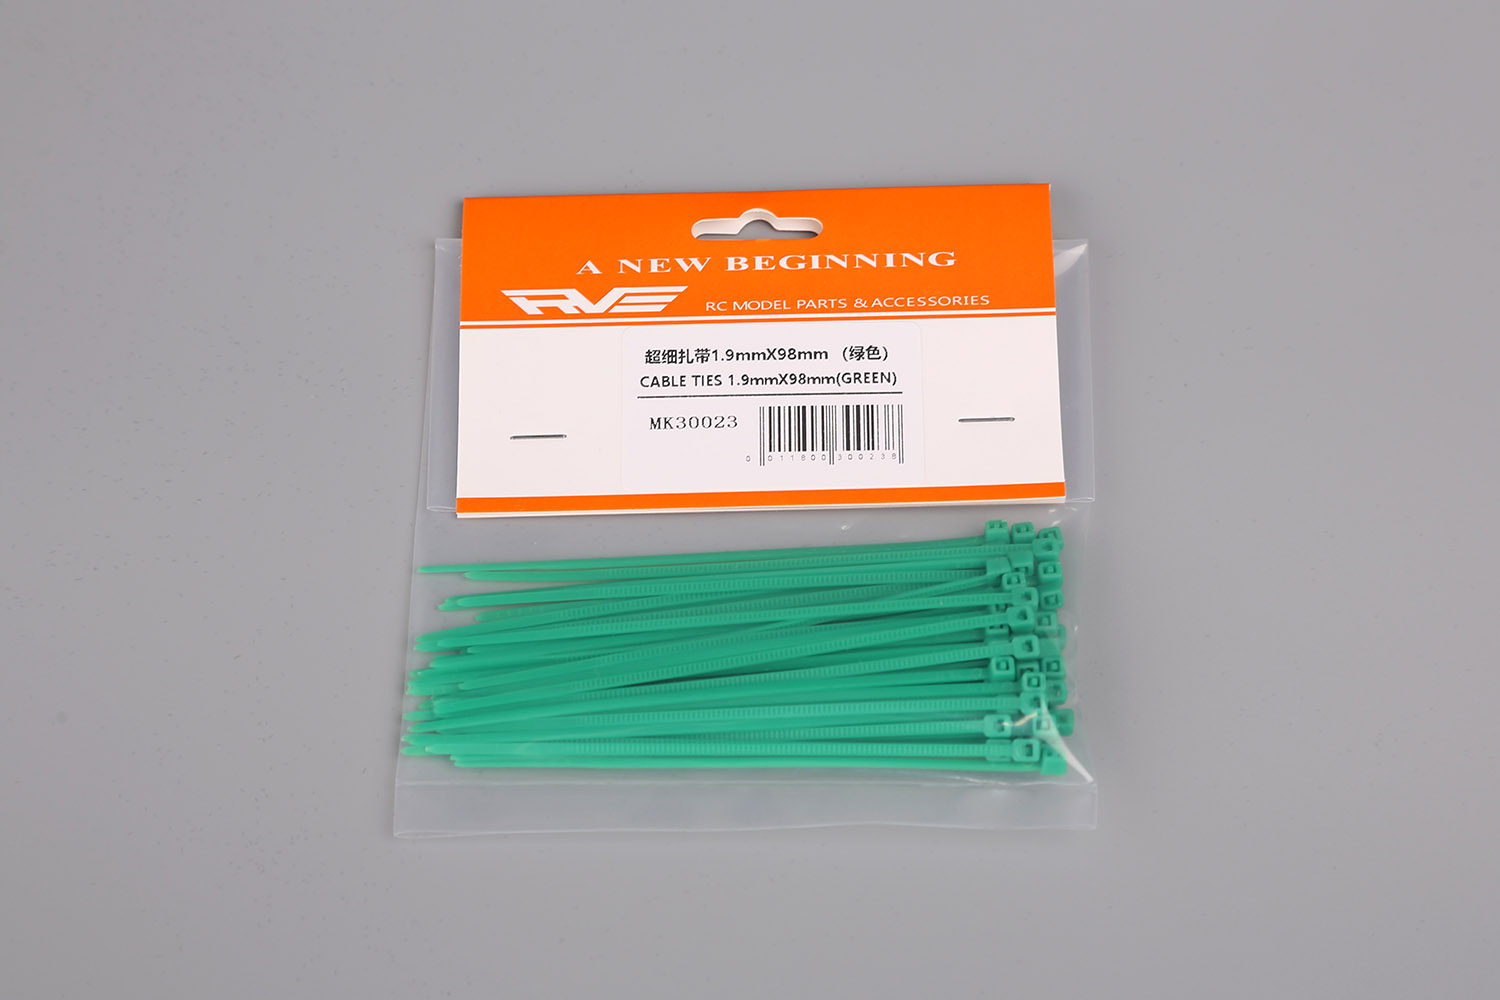 CABLE TIES 1.9mmX98mm (GREEN) MK30023(图1)